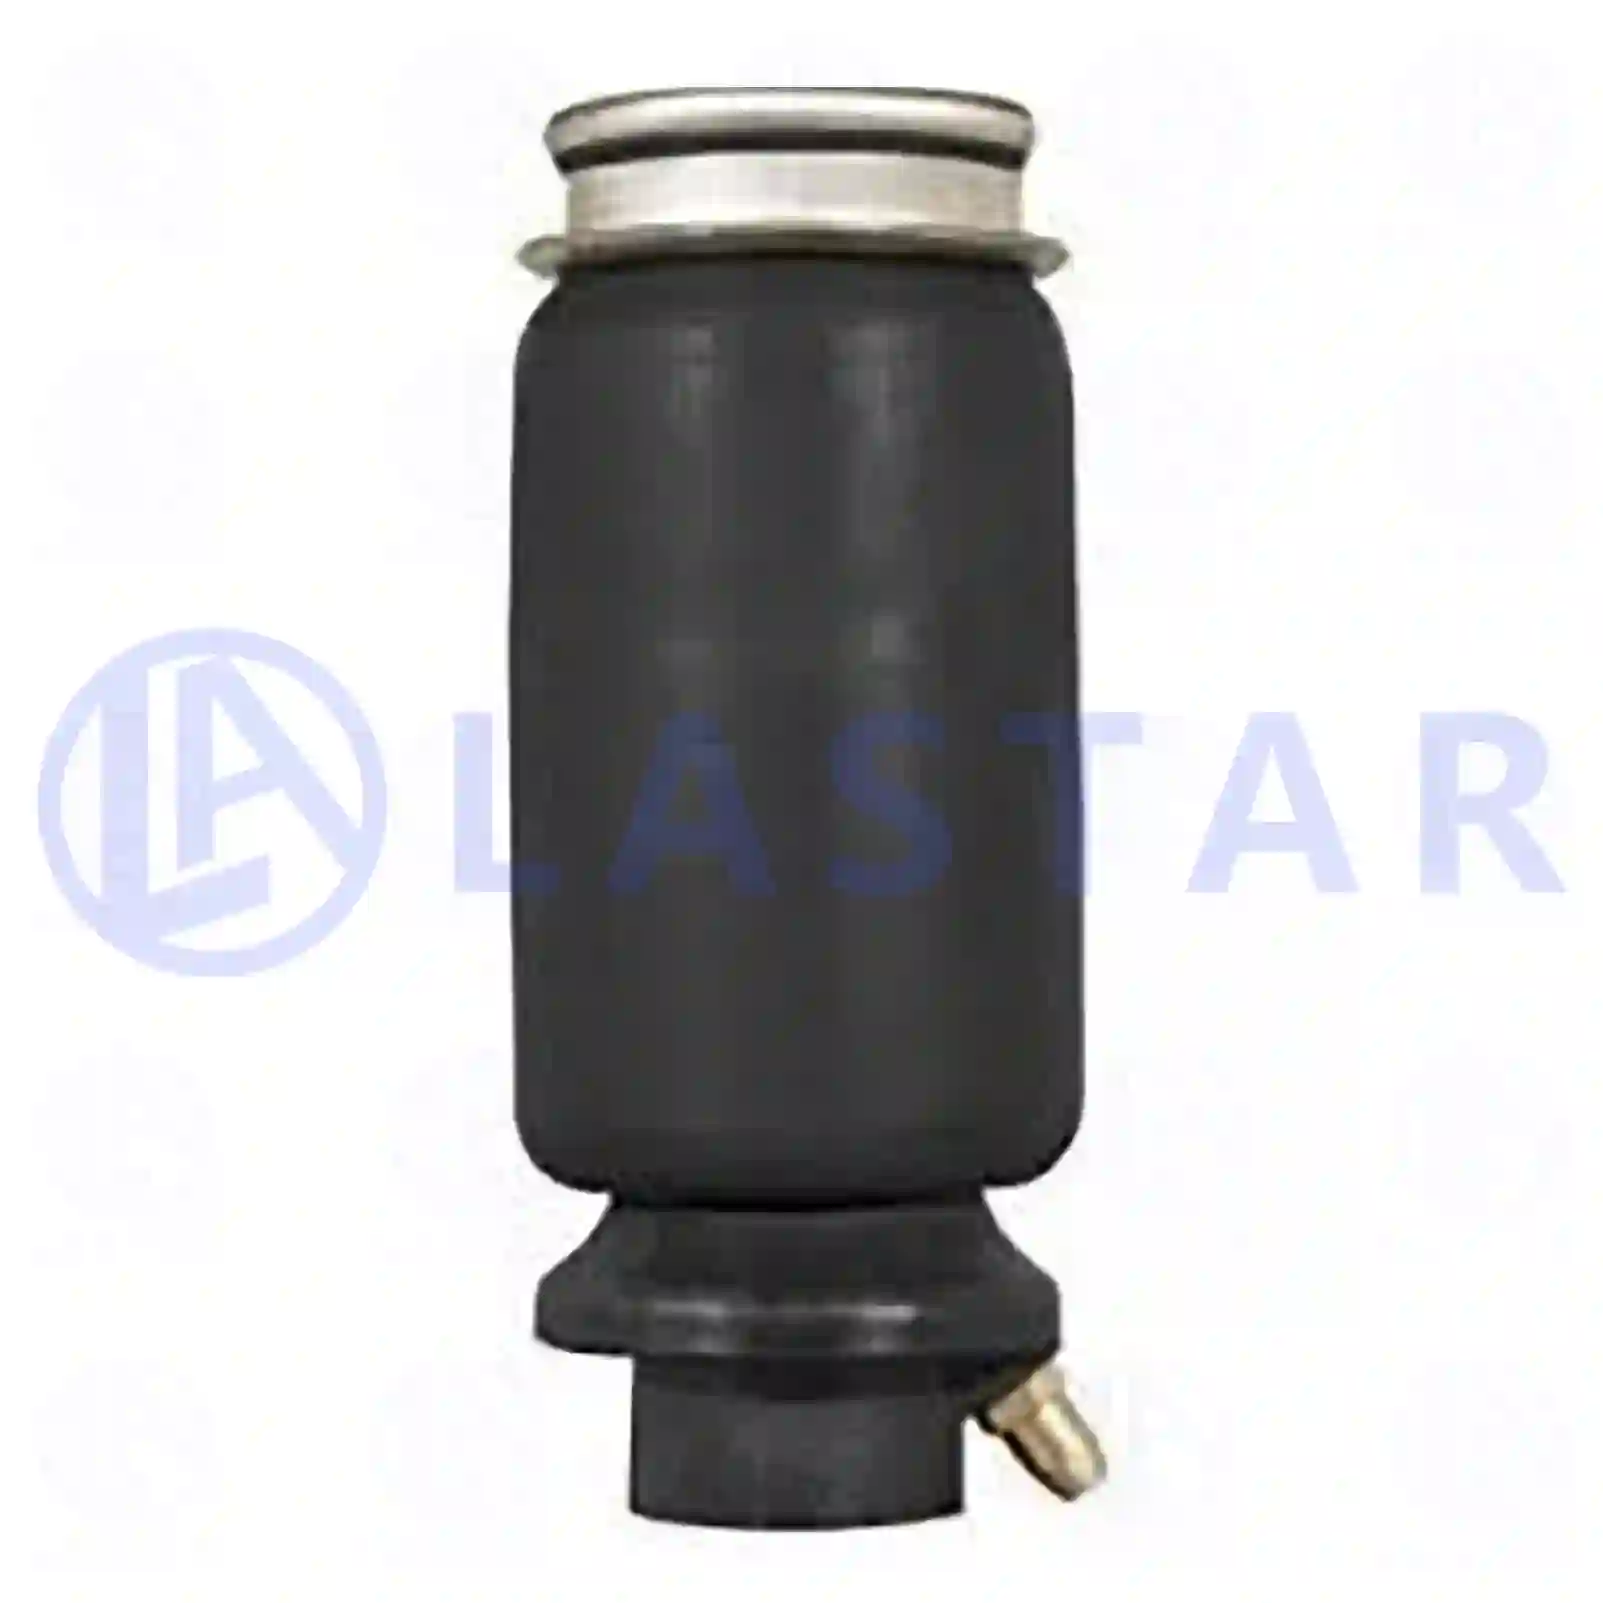 Air bellow, cabin shock absorber, 77735914, 1424231, ZG40695-0008 ||  77735914 Lastar Spare Part | Truck Spare Parts, Auotomotive Spare Parts Air bellow, cabin shock absorber, 77735914, 1424231, ZG40695-0008 ||  77735914 Lastar Spare Part | Truck Spare Parts, Auotomotive Spare Parts